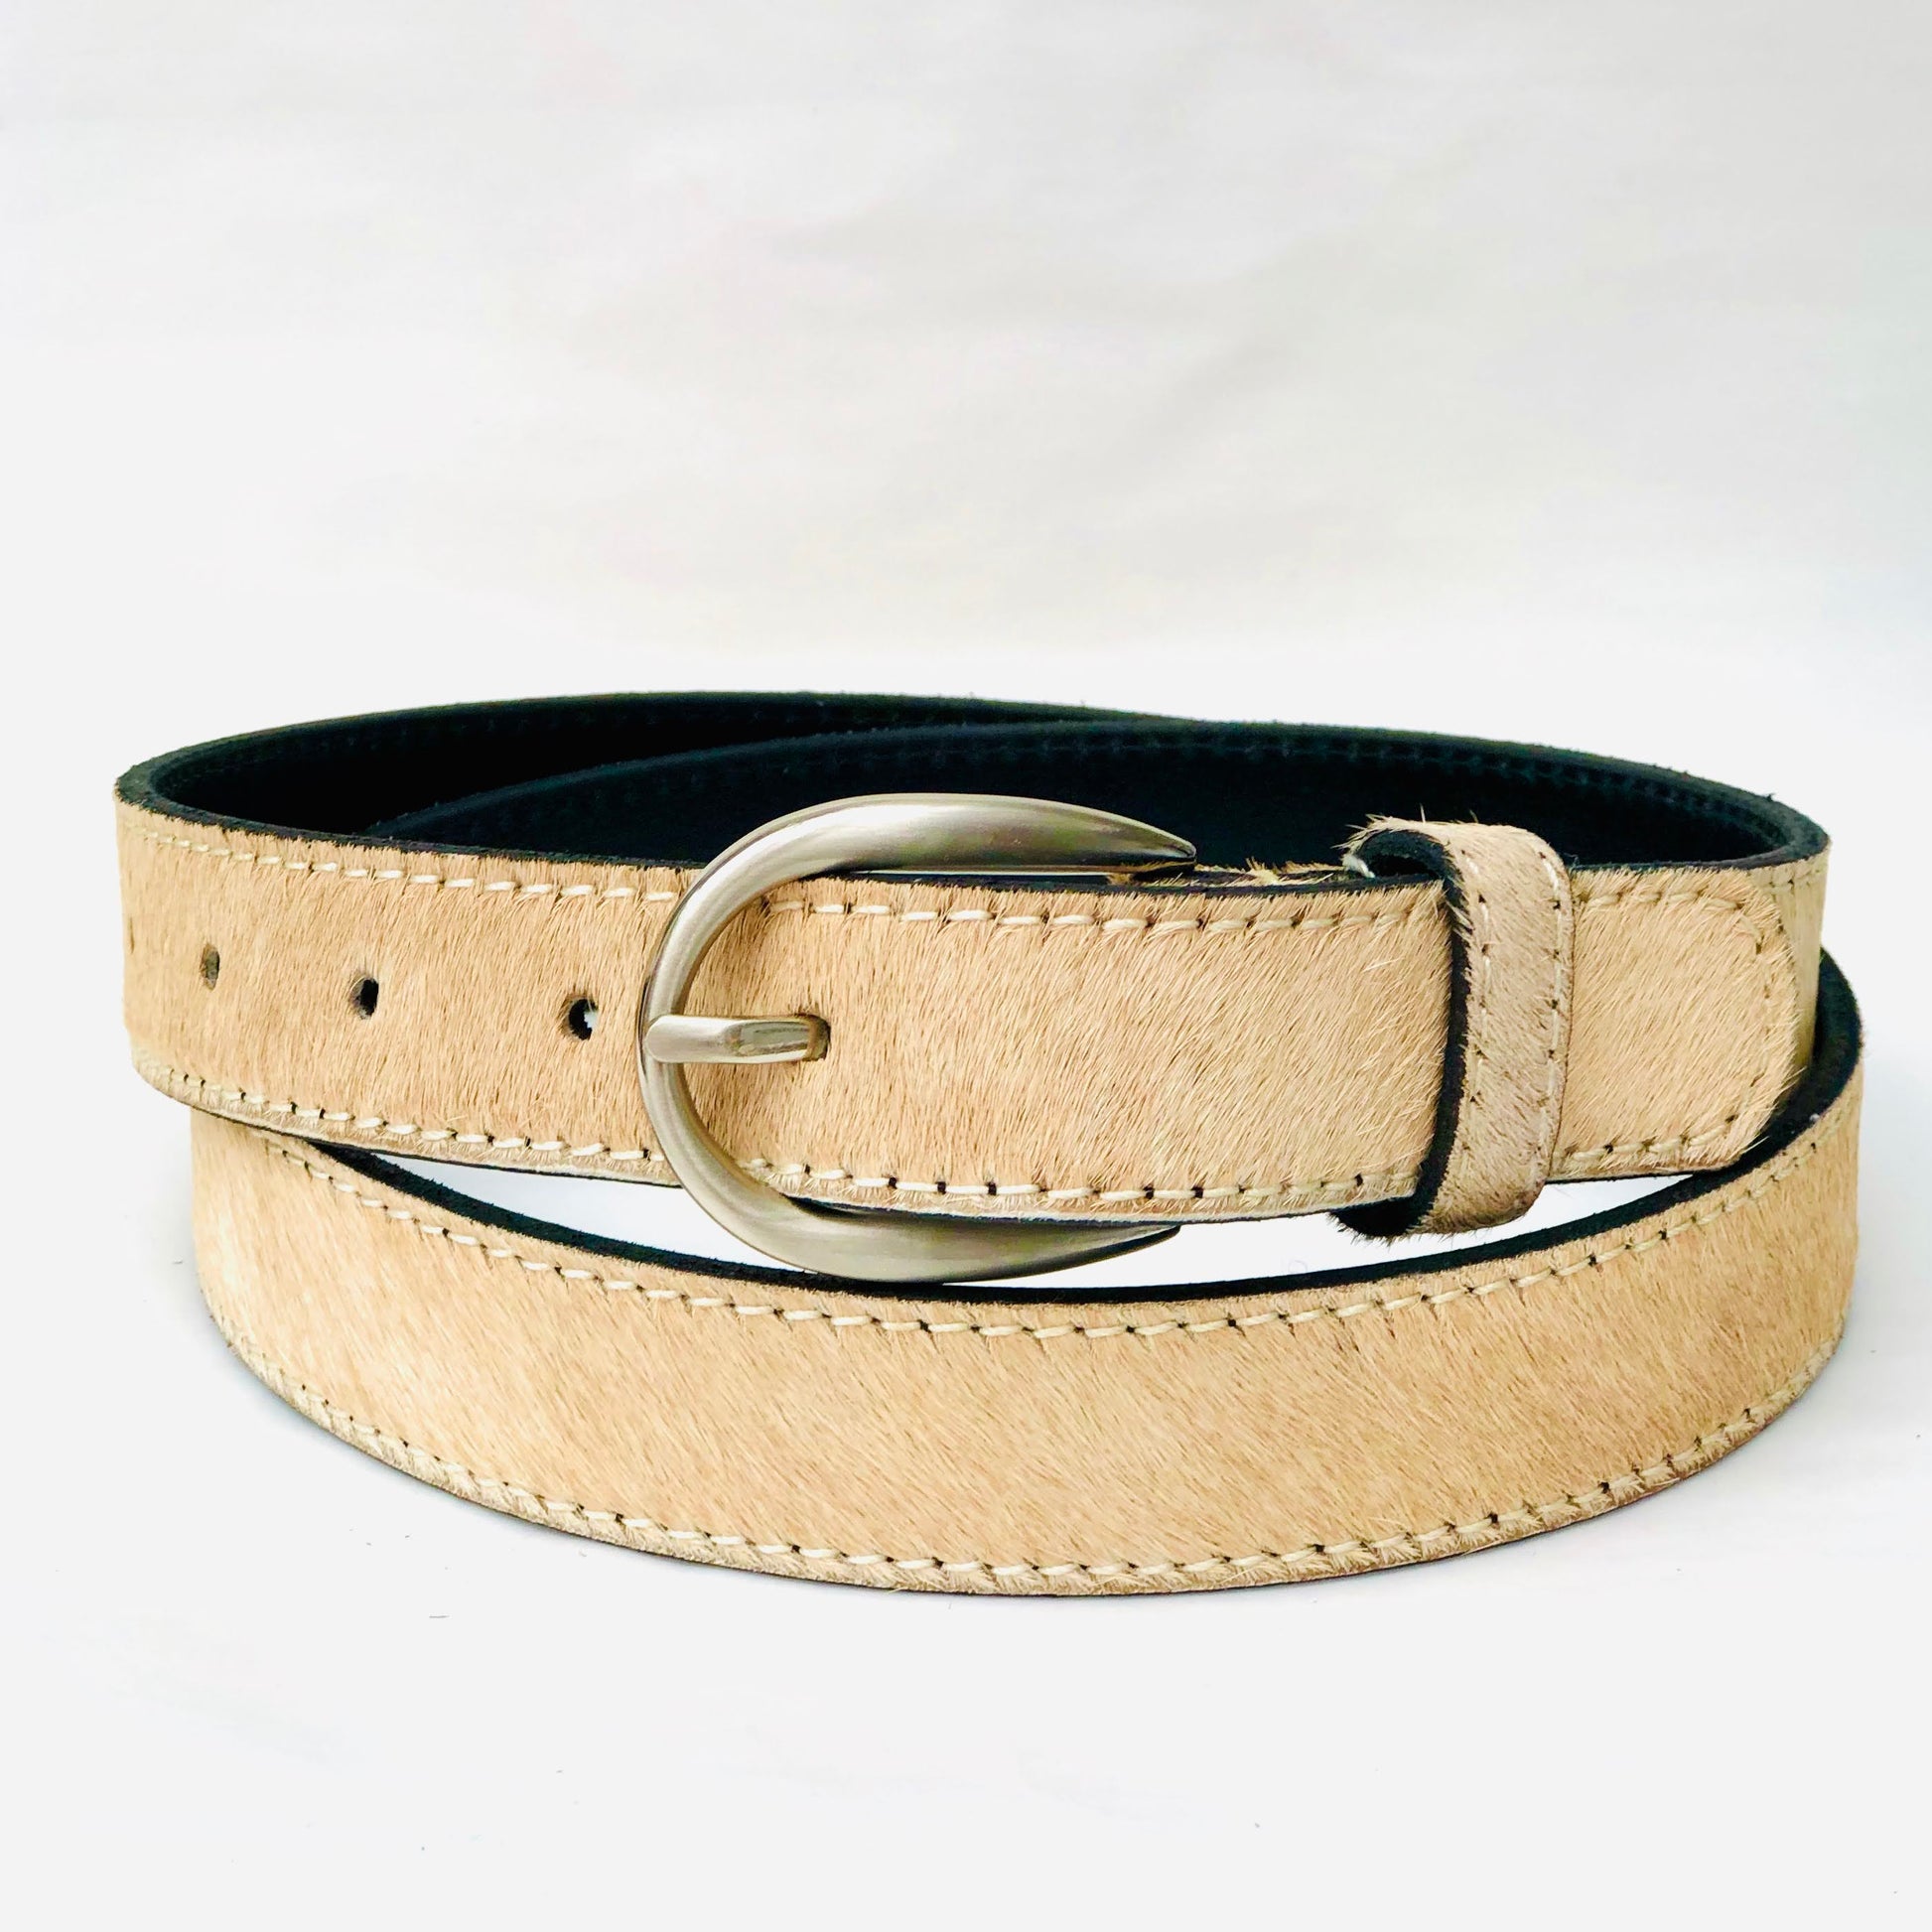 Folded Beige leather belt with metal buckle